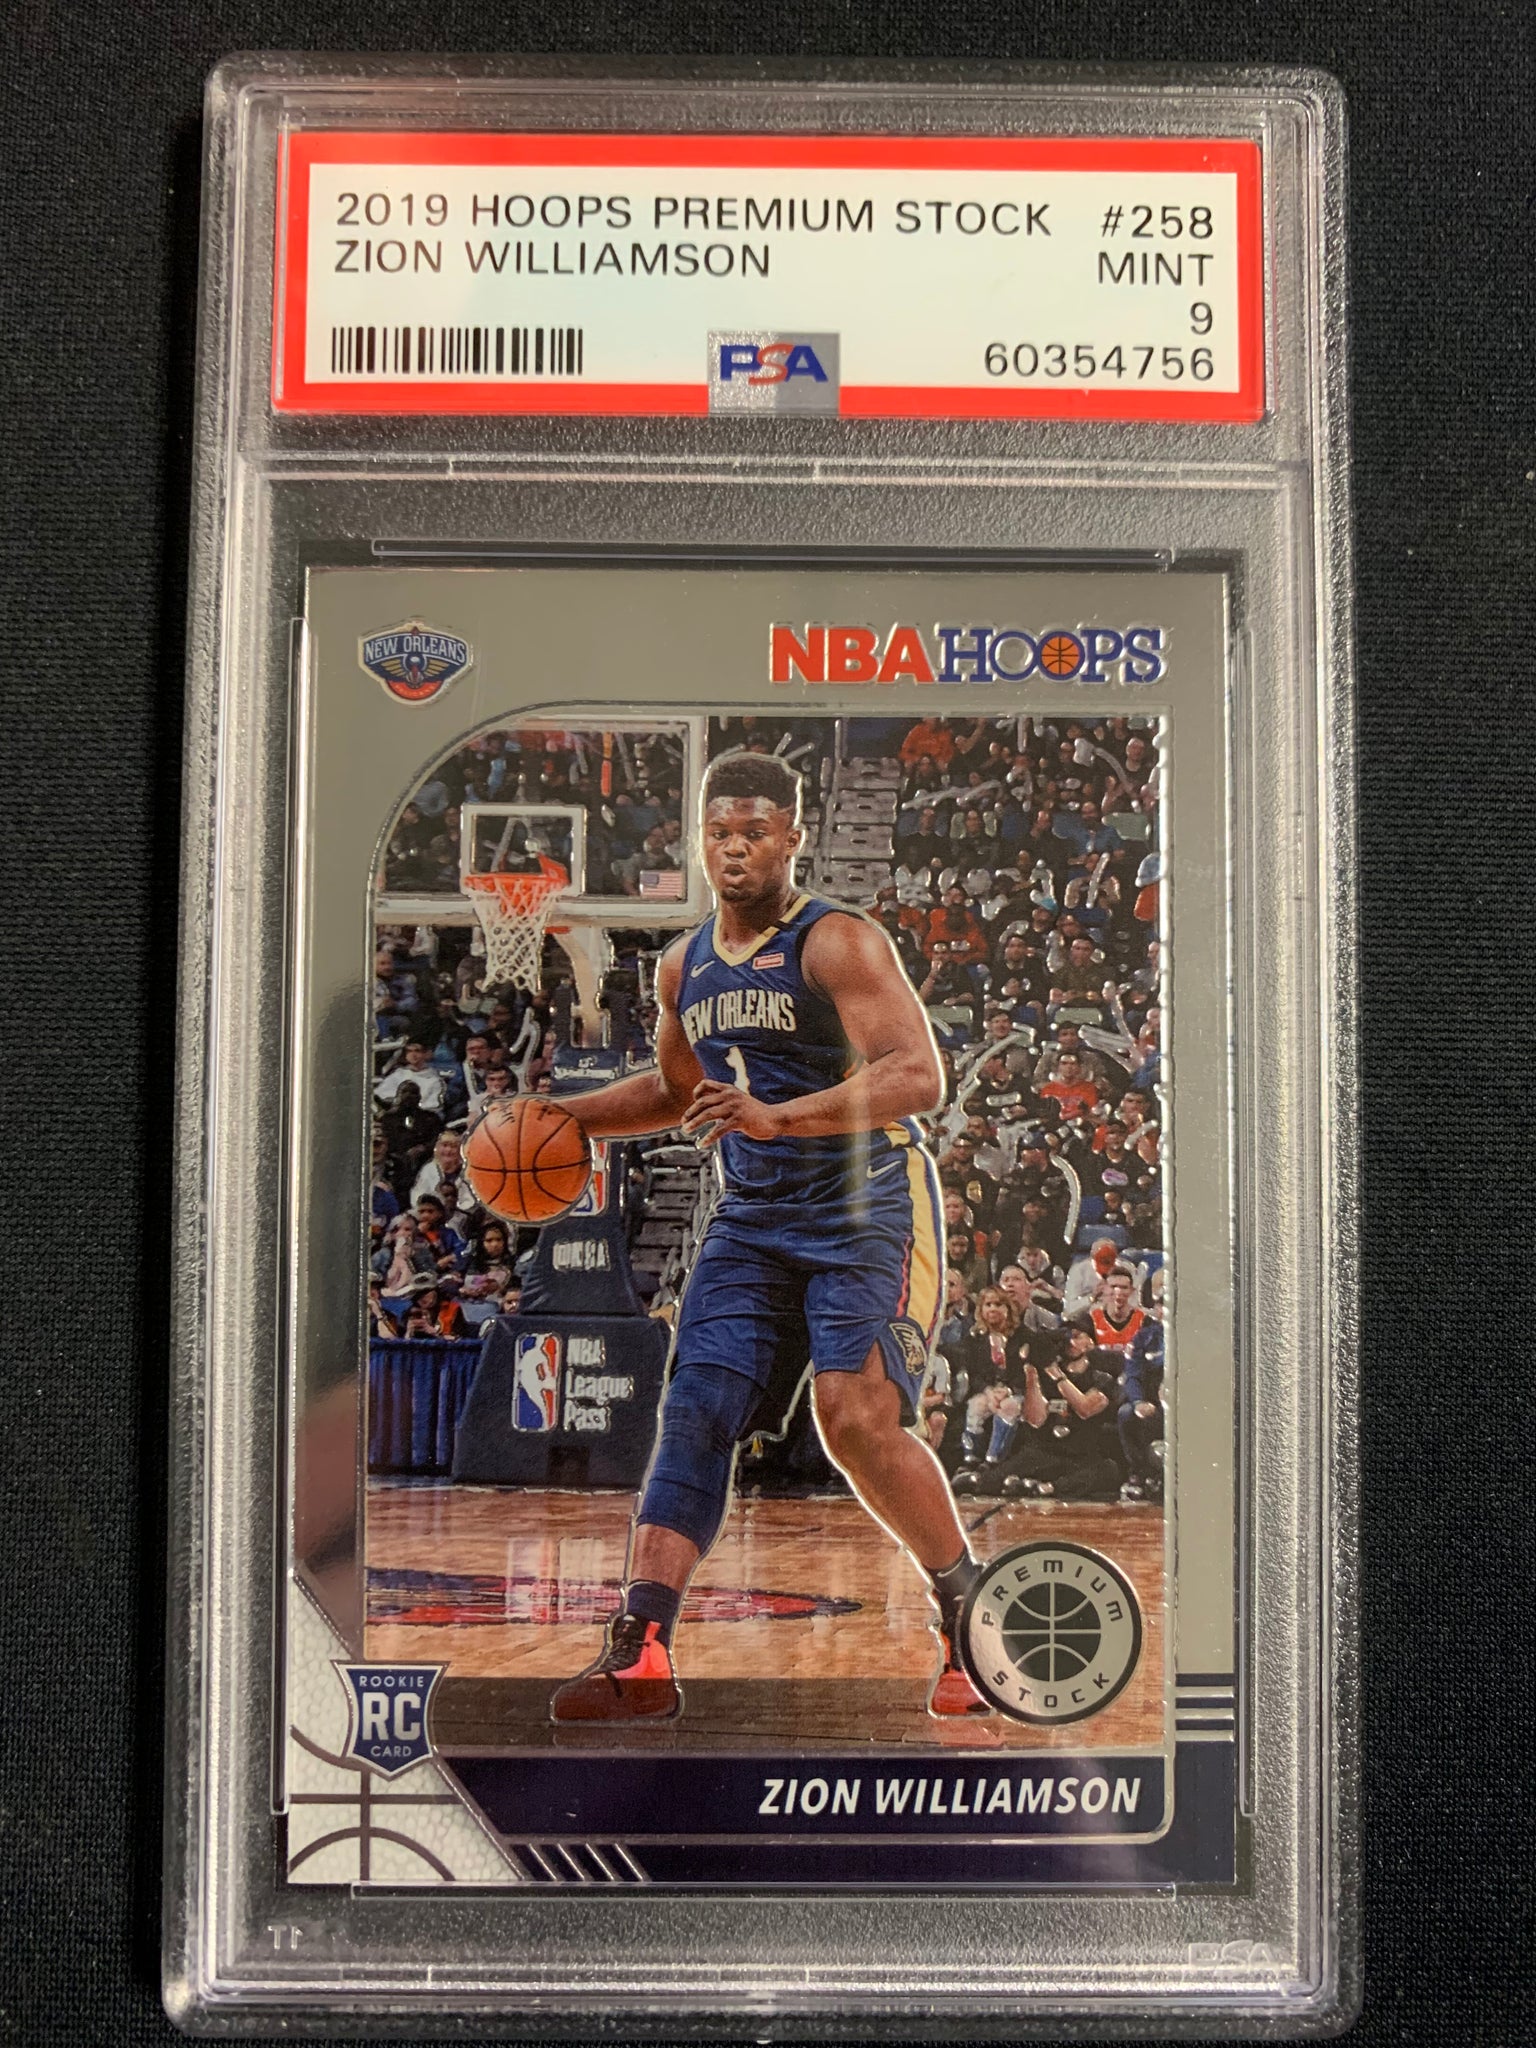 2019 PANINI NBA HOOPS PREMIUM STOCK #258 NEW ORLEANS PELICANS - ZION WILLIAMSON ROOKIE CARD GRADED PSA 9 MINT